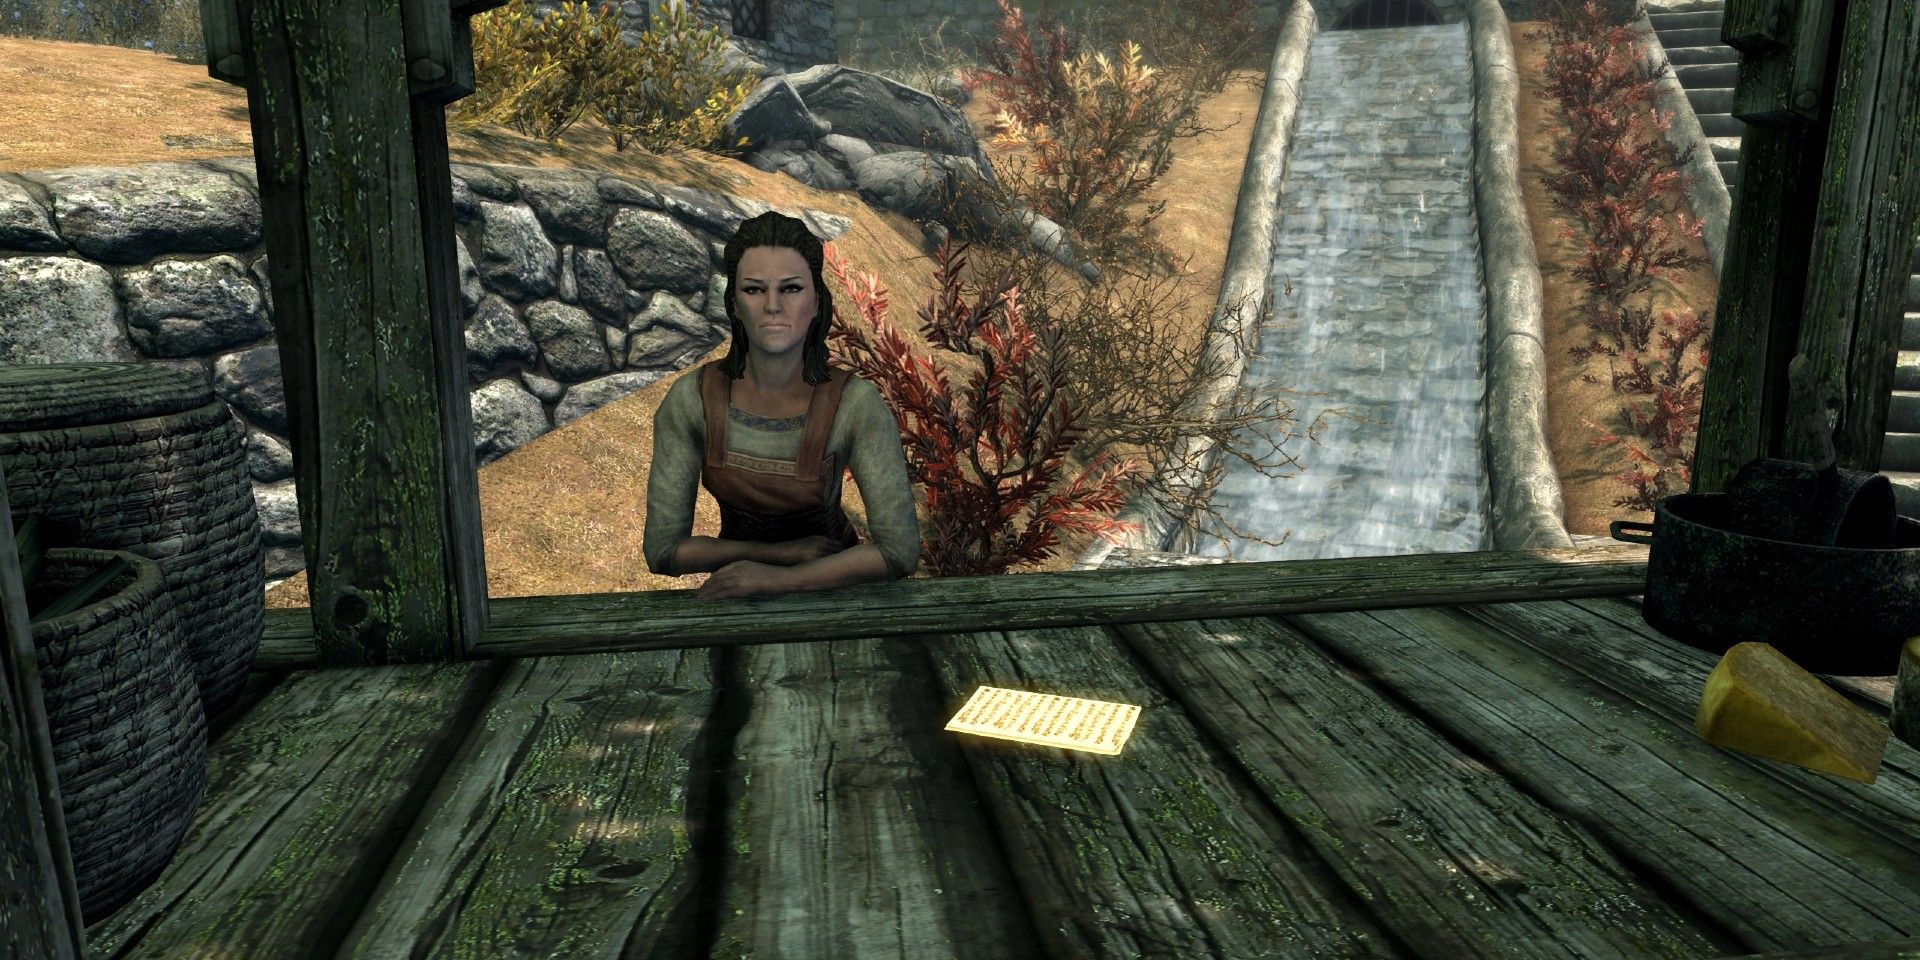 Elden Ring-Style Messages Come To Skyrim Through Mod